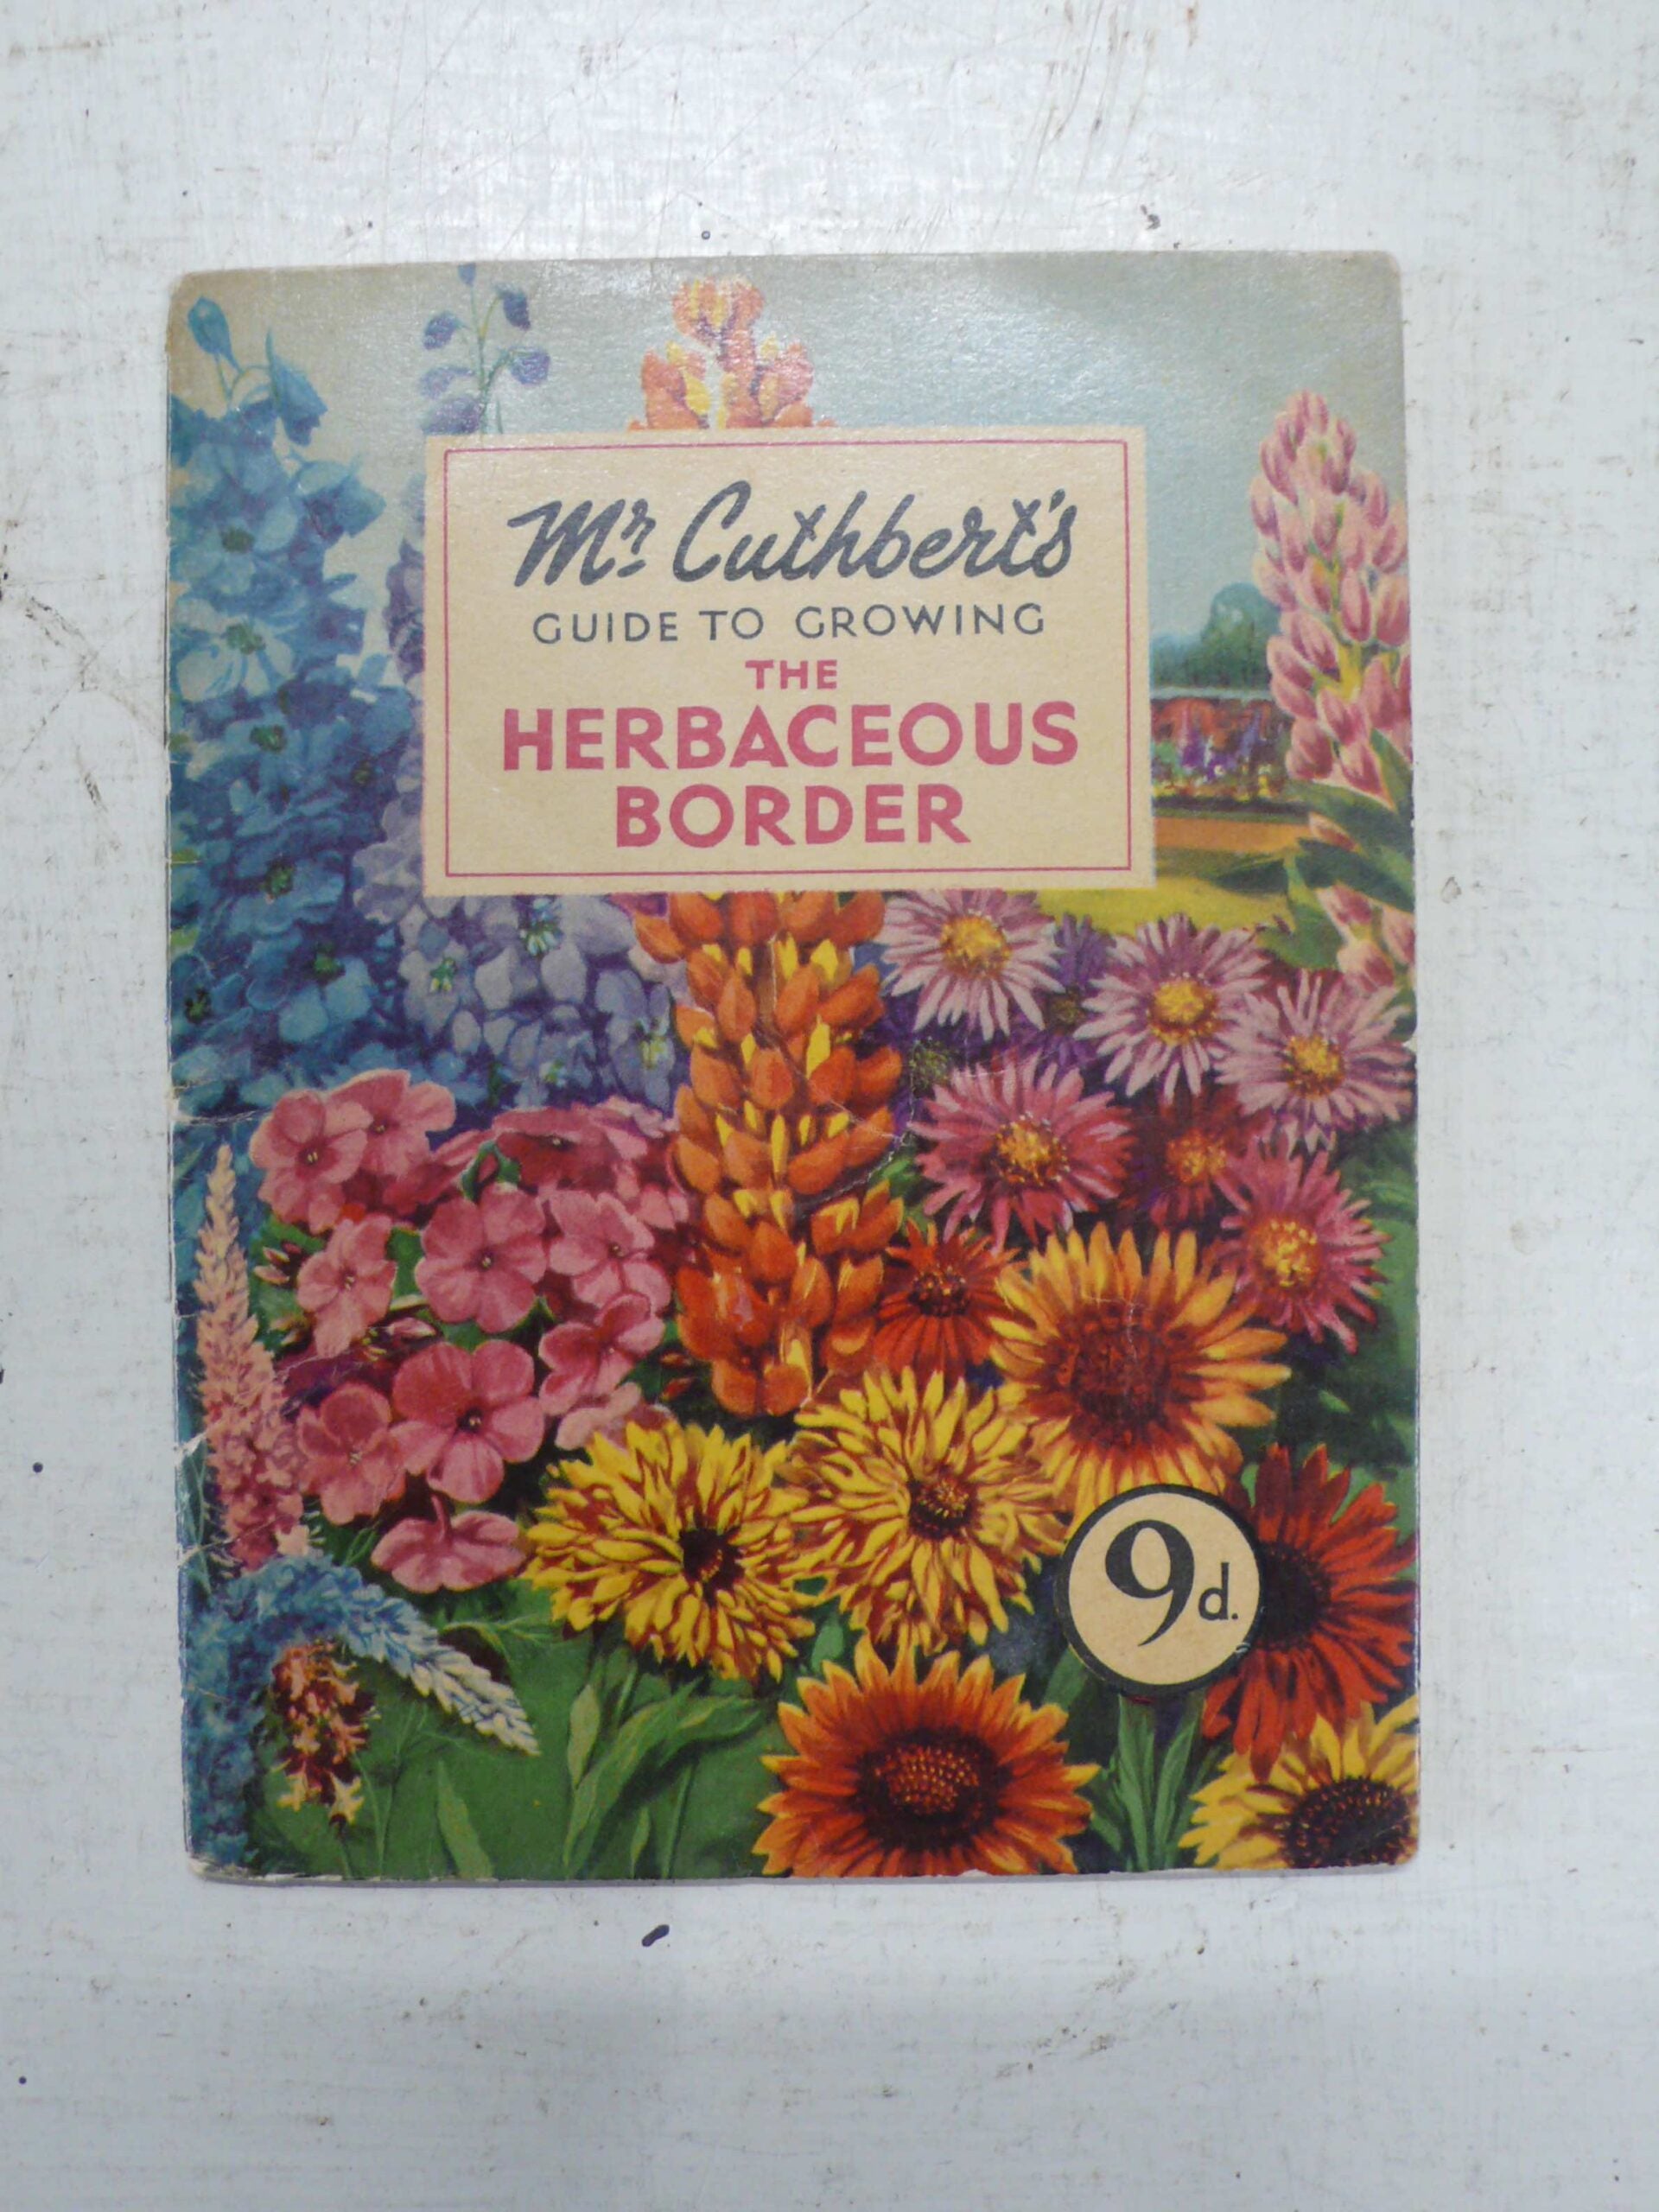 Mr Cuthberts Herbaceous Border Guide